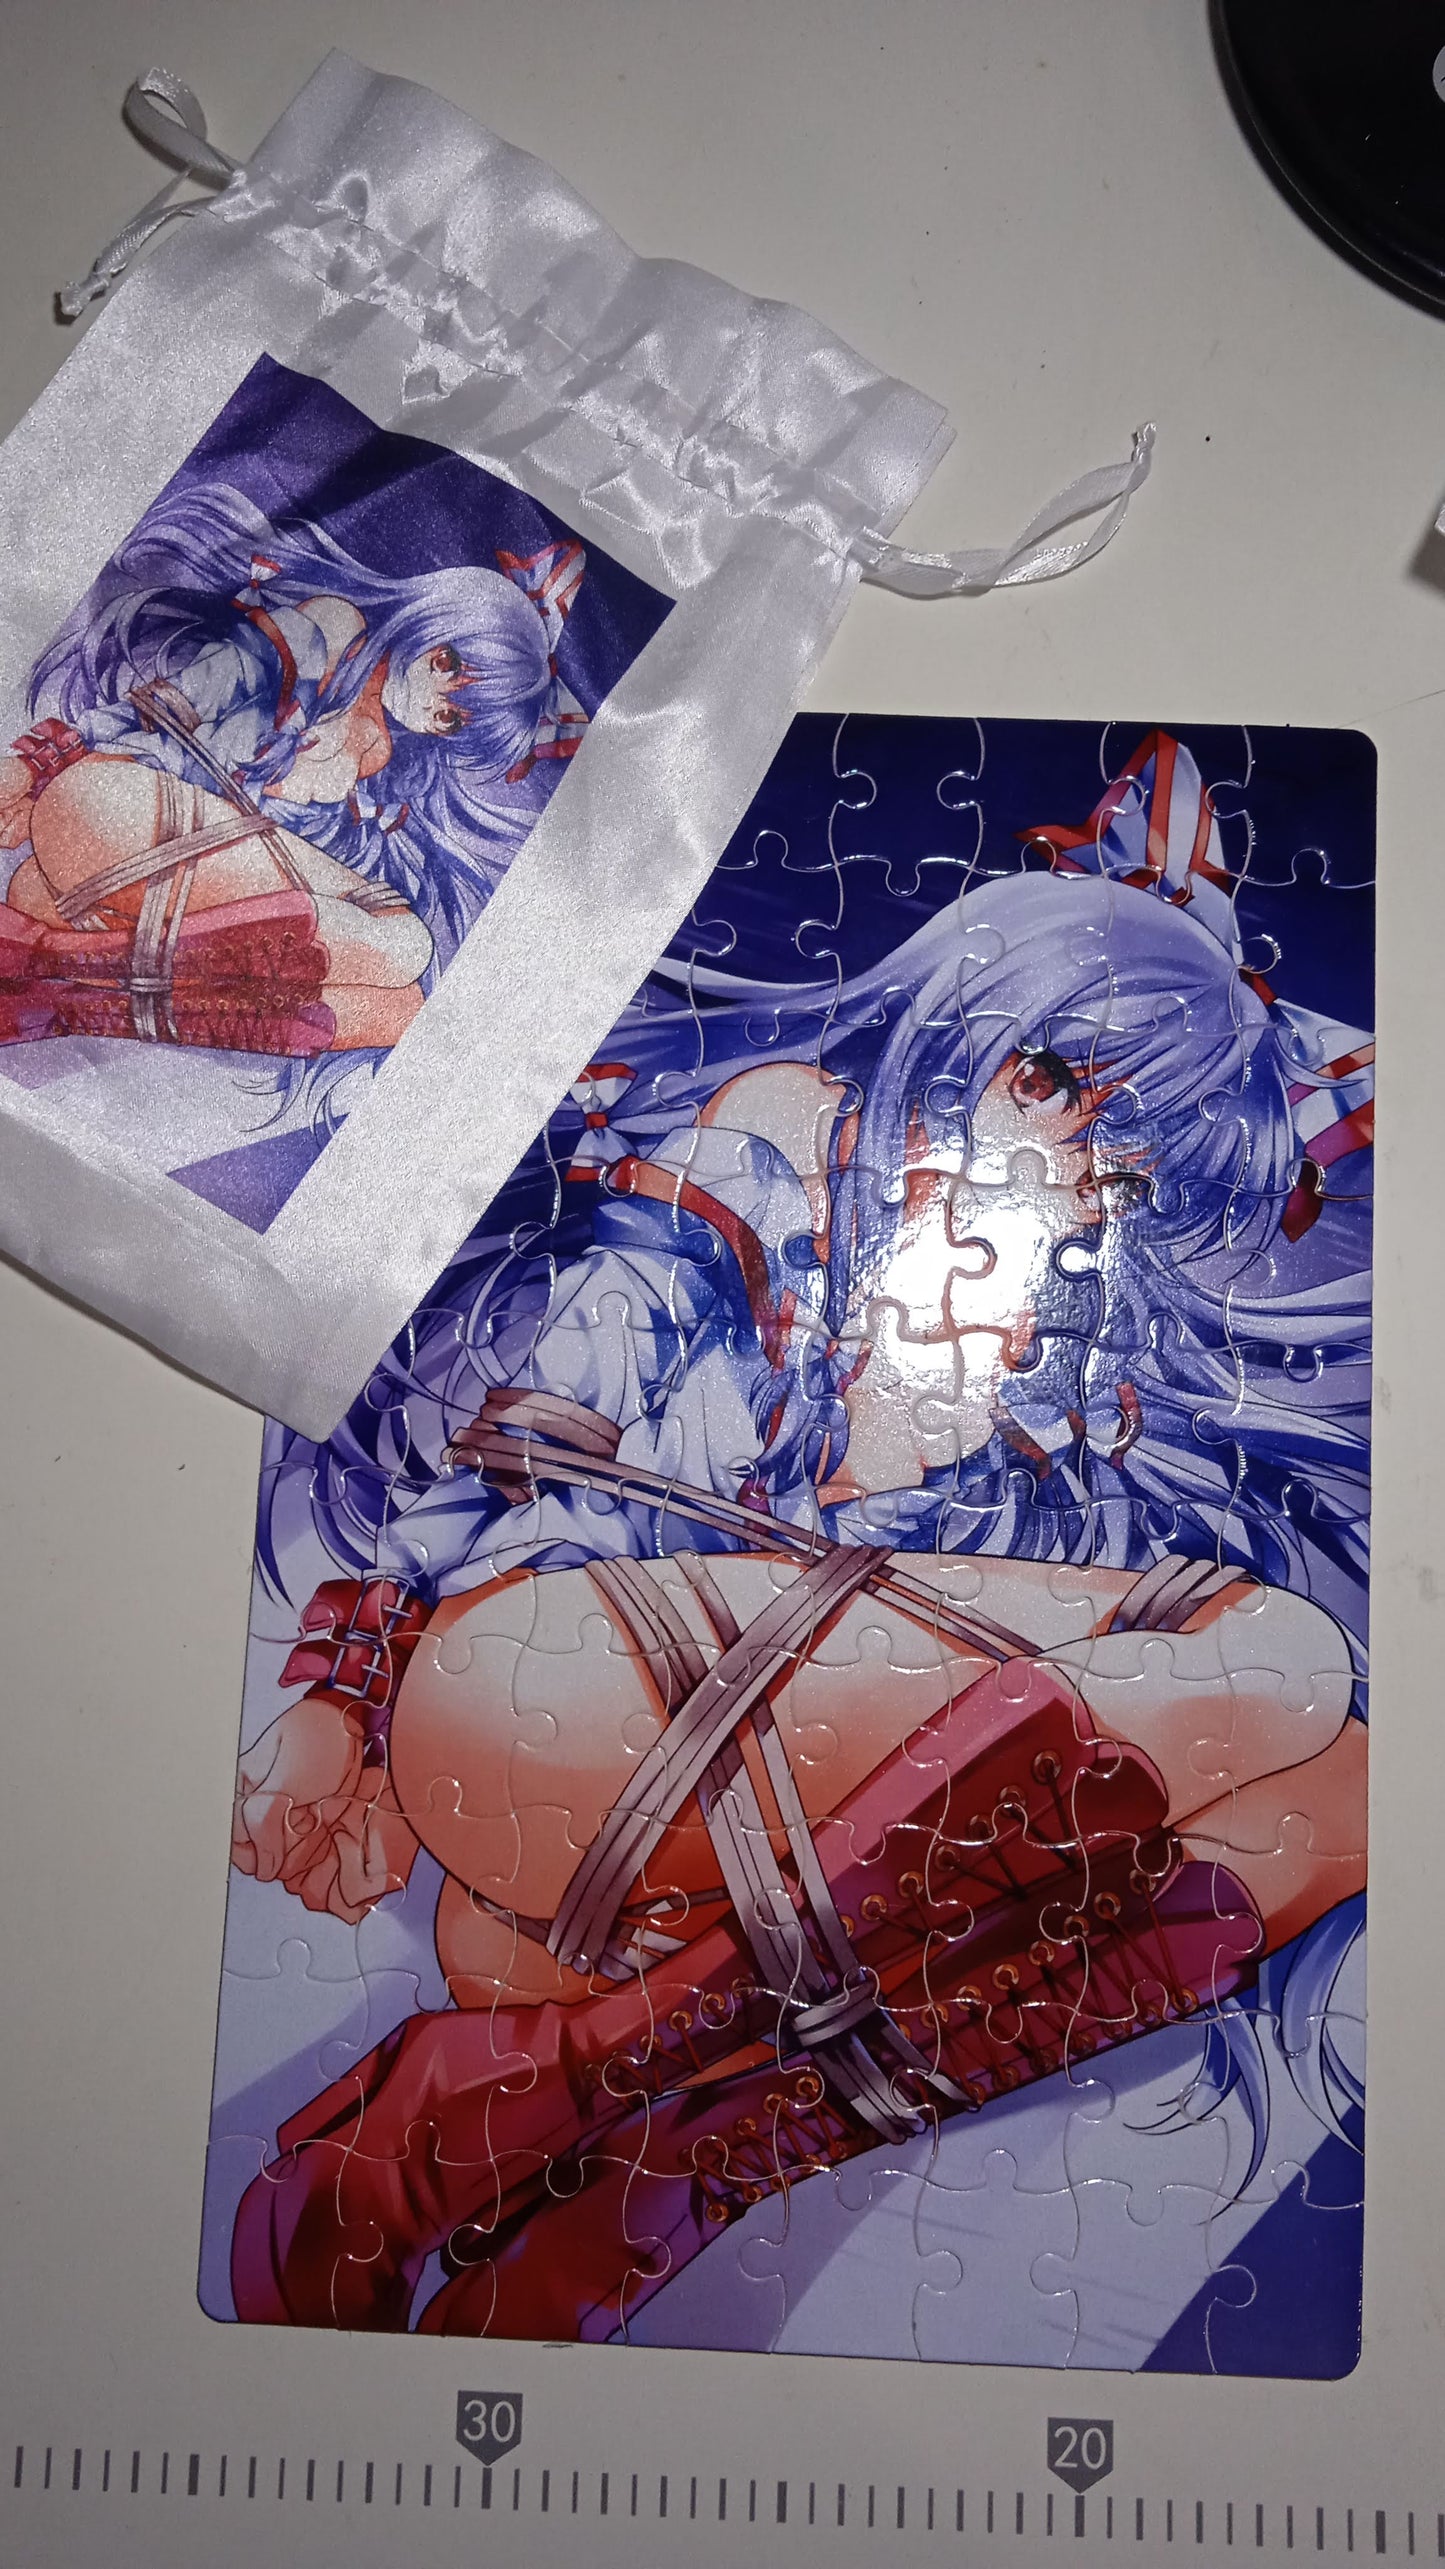 Cardboard puzzles hot anime girls Puzzles, Adult Puzzle, Decompression Toy, Creative Gift, Birthday Gift/ lolita girls / anime puzzle